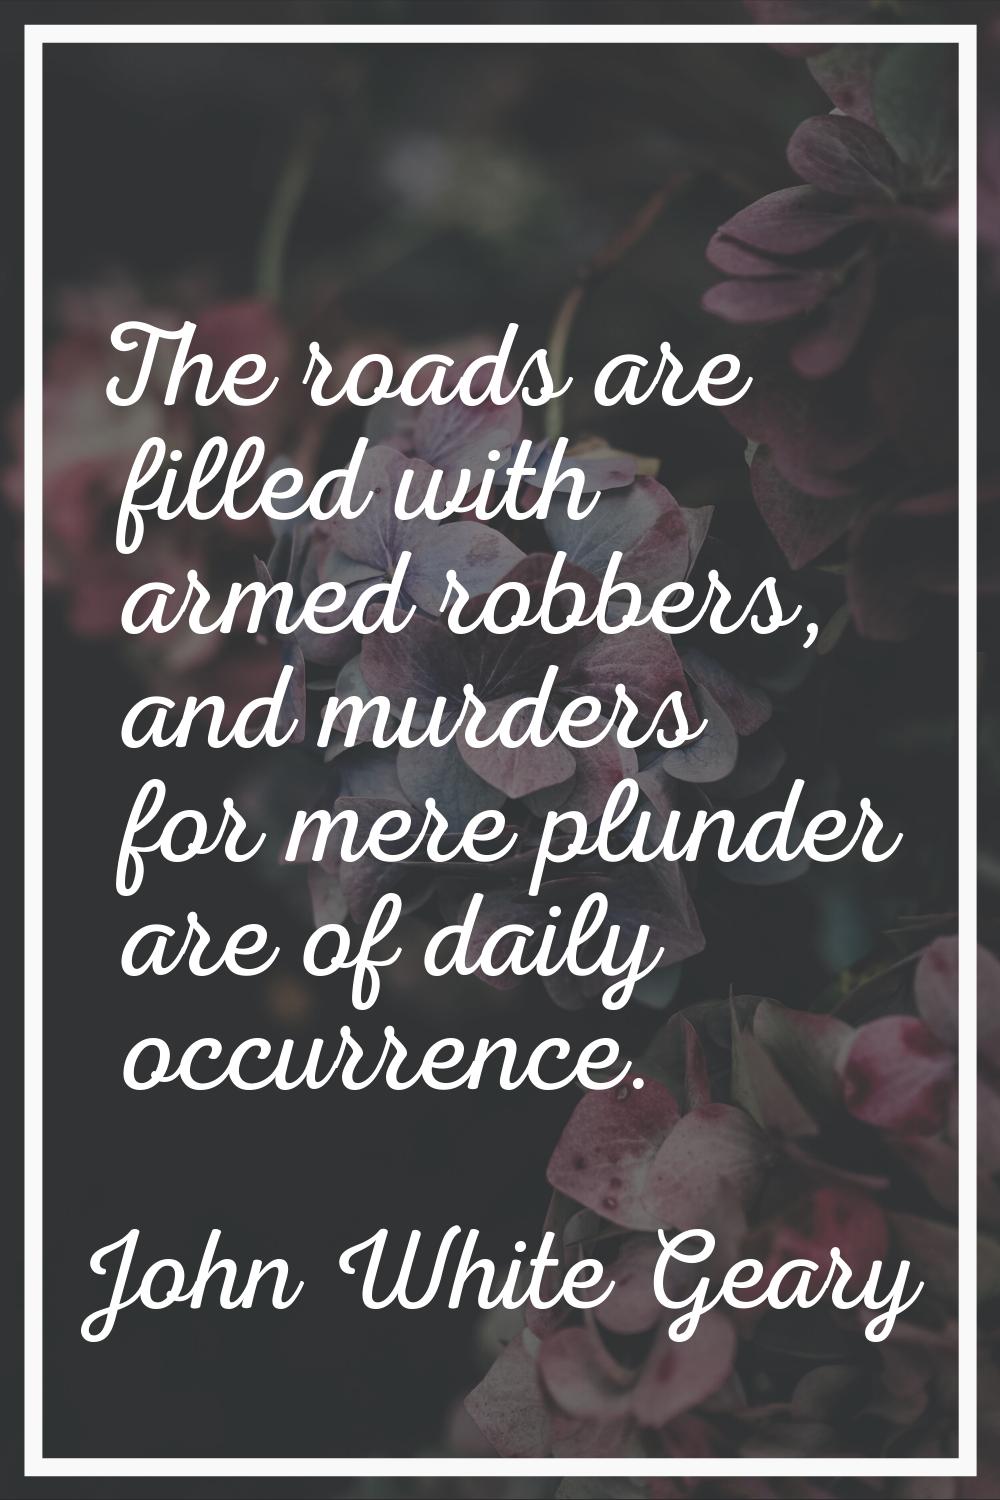 The roads are filled with armed robbers, and murders for mere plunder are of daily occurrence.